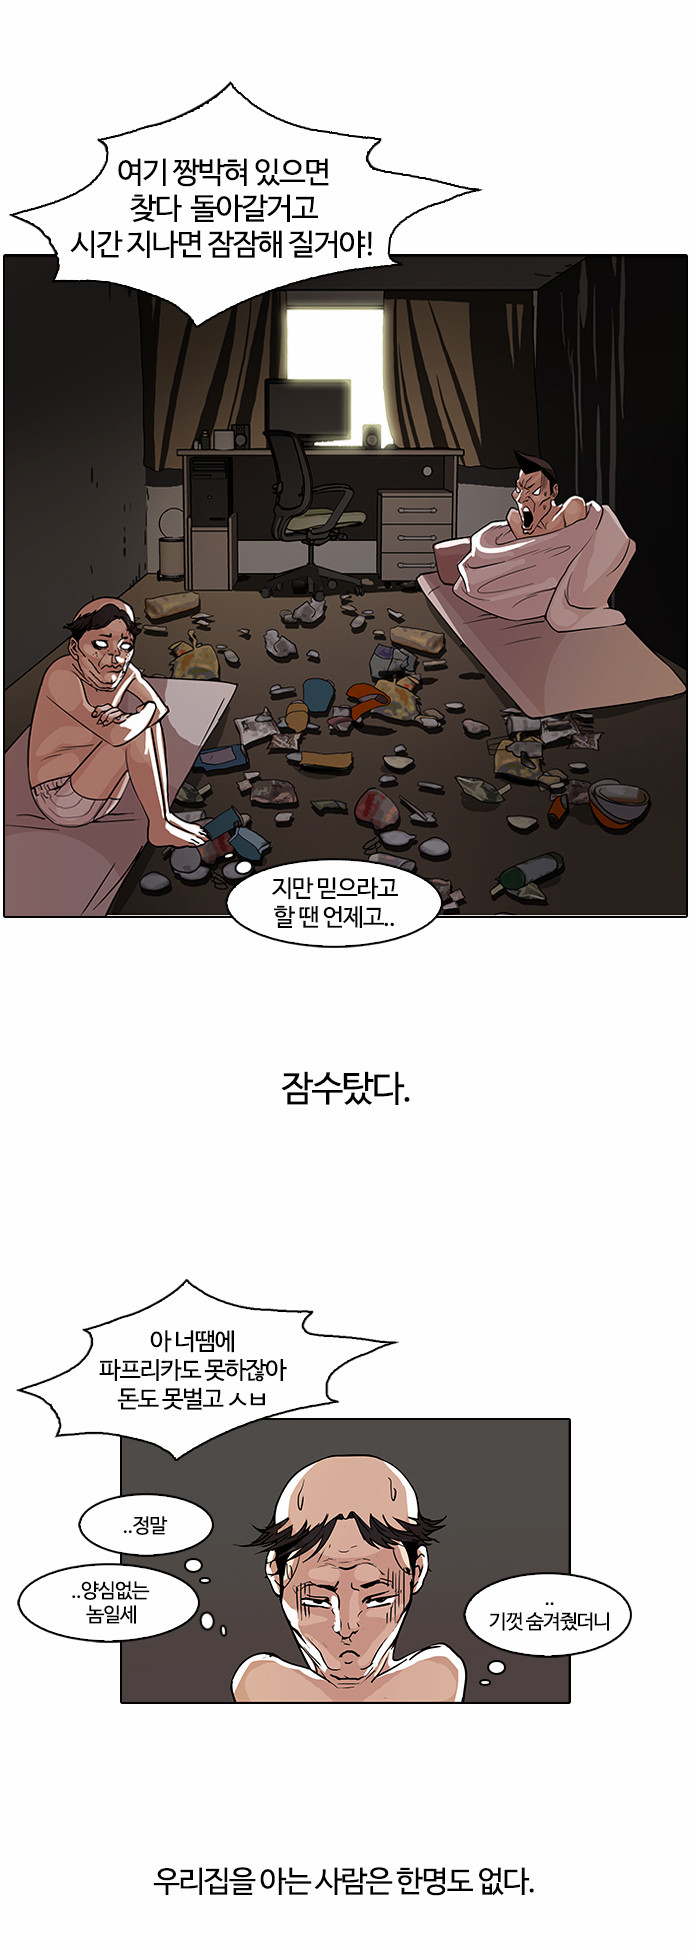 Lookism - Chapter 65 - Page 4